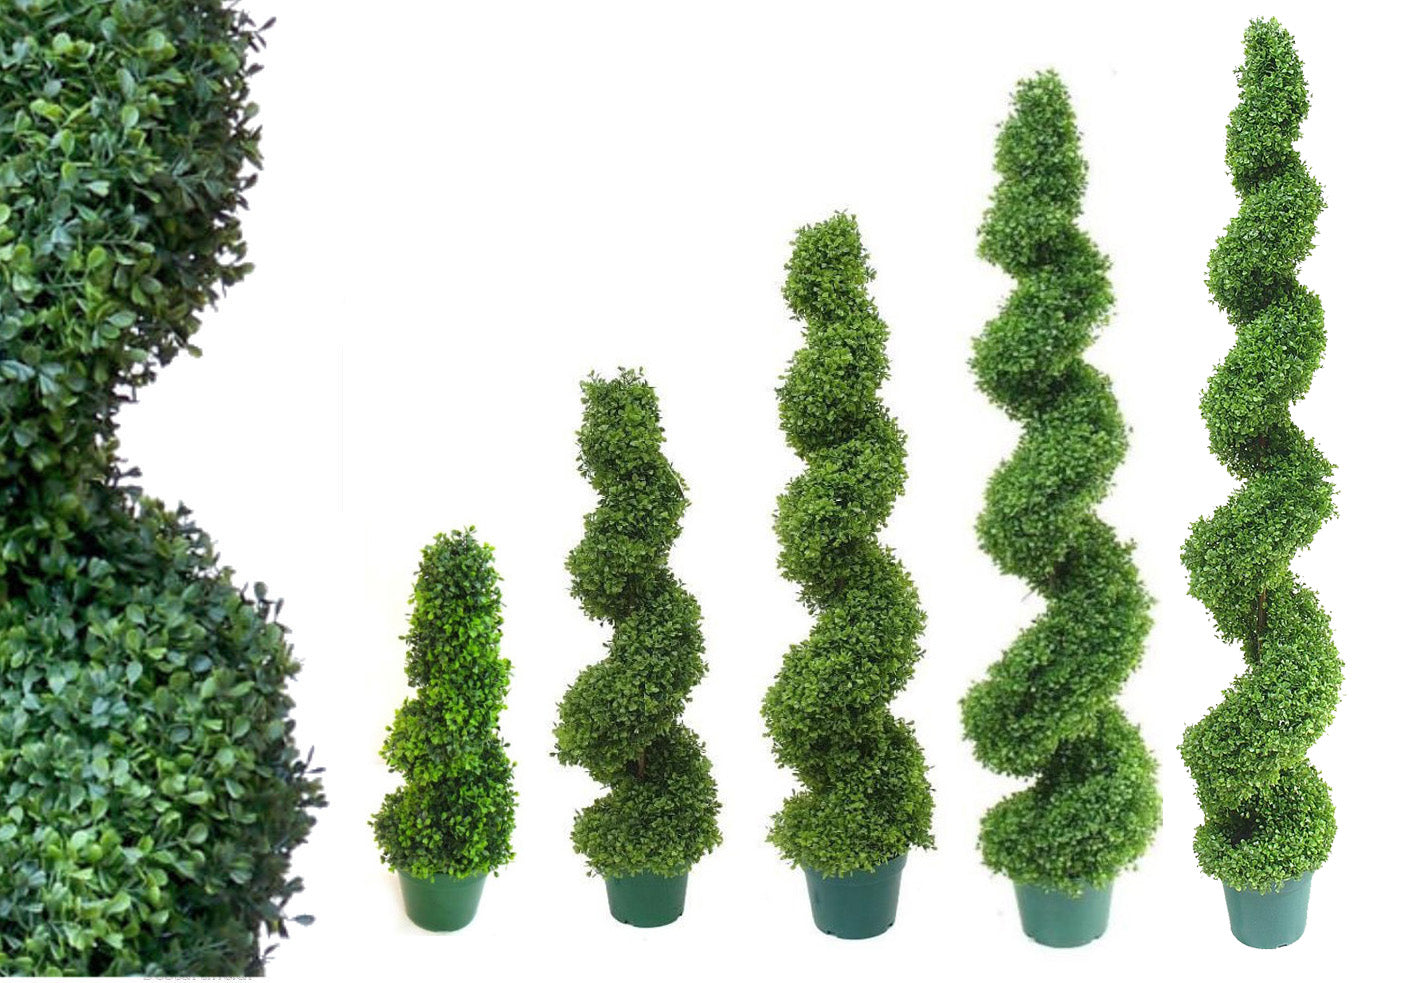 Best Artificial Boxwood Spiral Topiary Tree